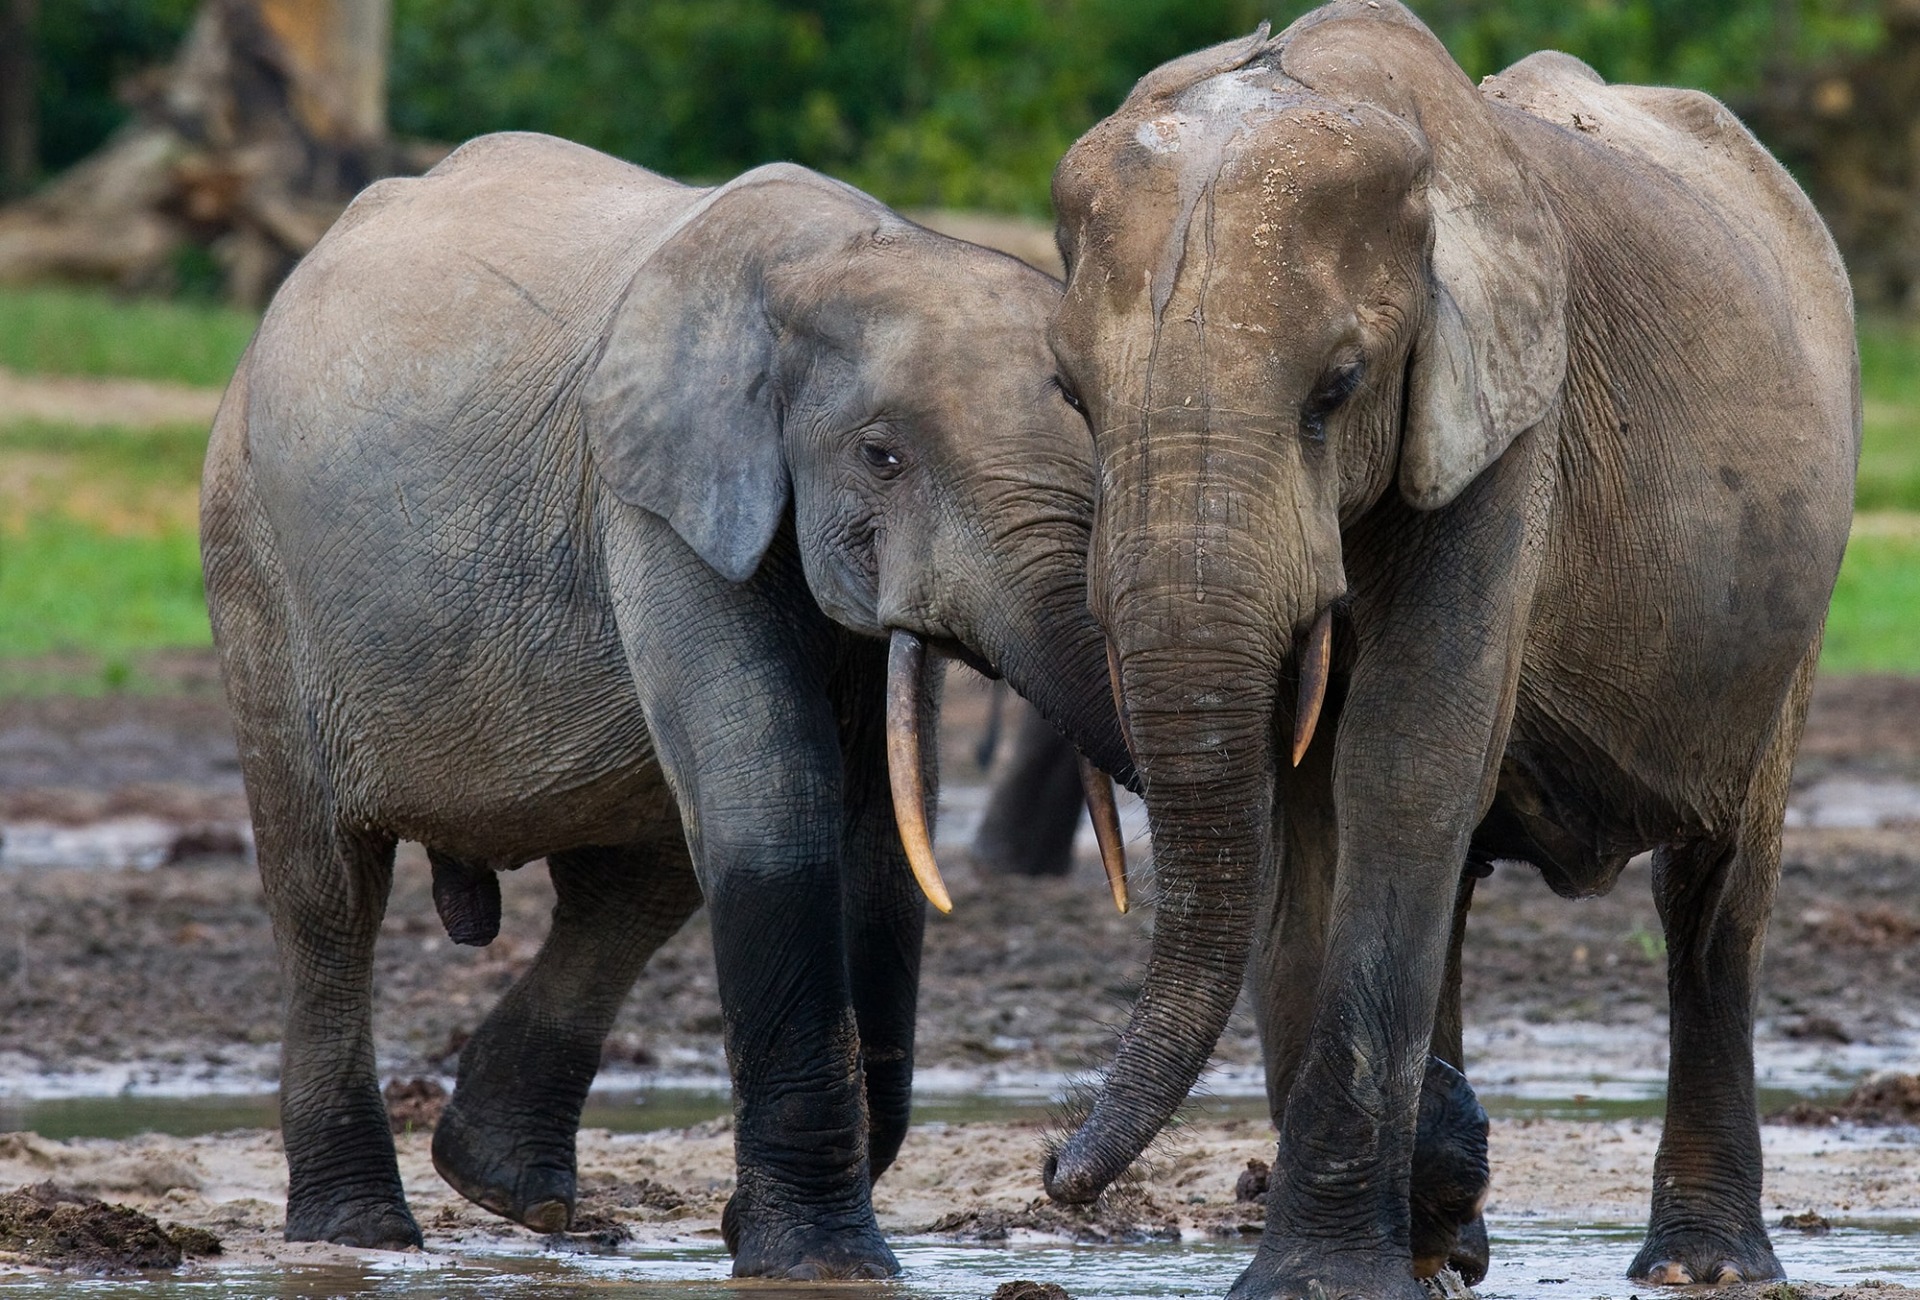 Critically Endangered Forest Elephants, by Gudkov Andrey/shutterstock